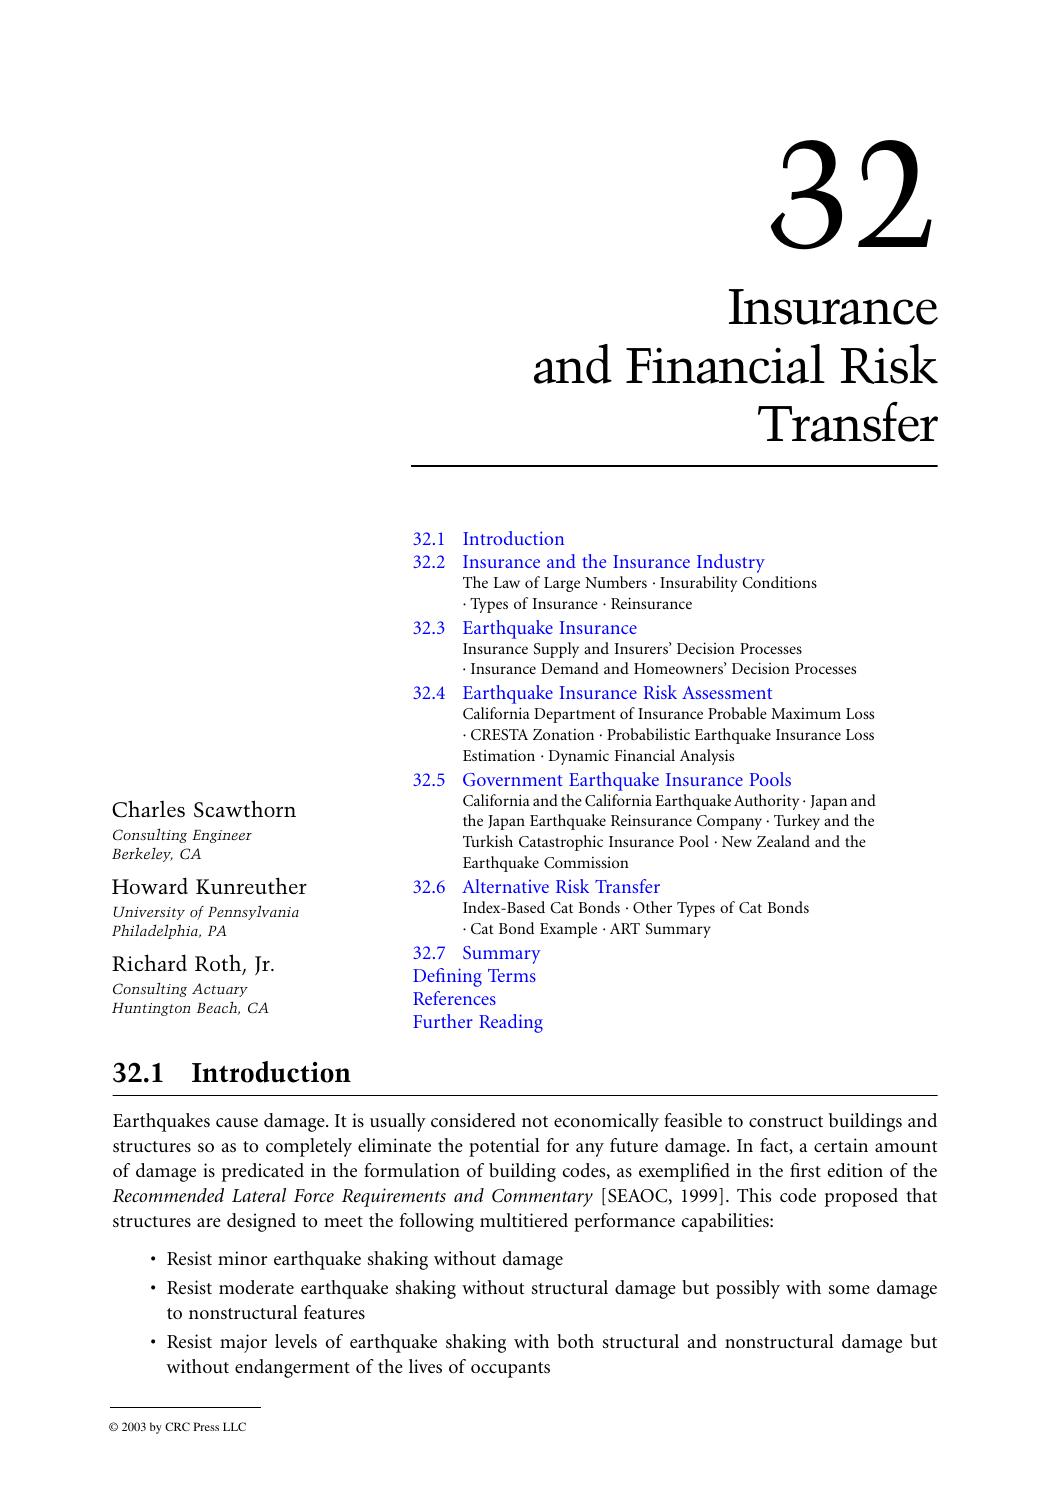 Chapter 32: Insurance and Financial Risk Transfer by Charles Scawthorn Howard Kunreuther and Richard Roth Jr